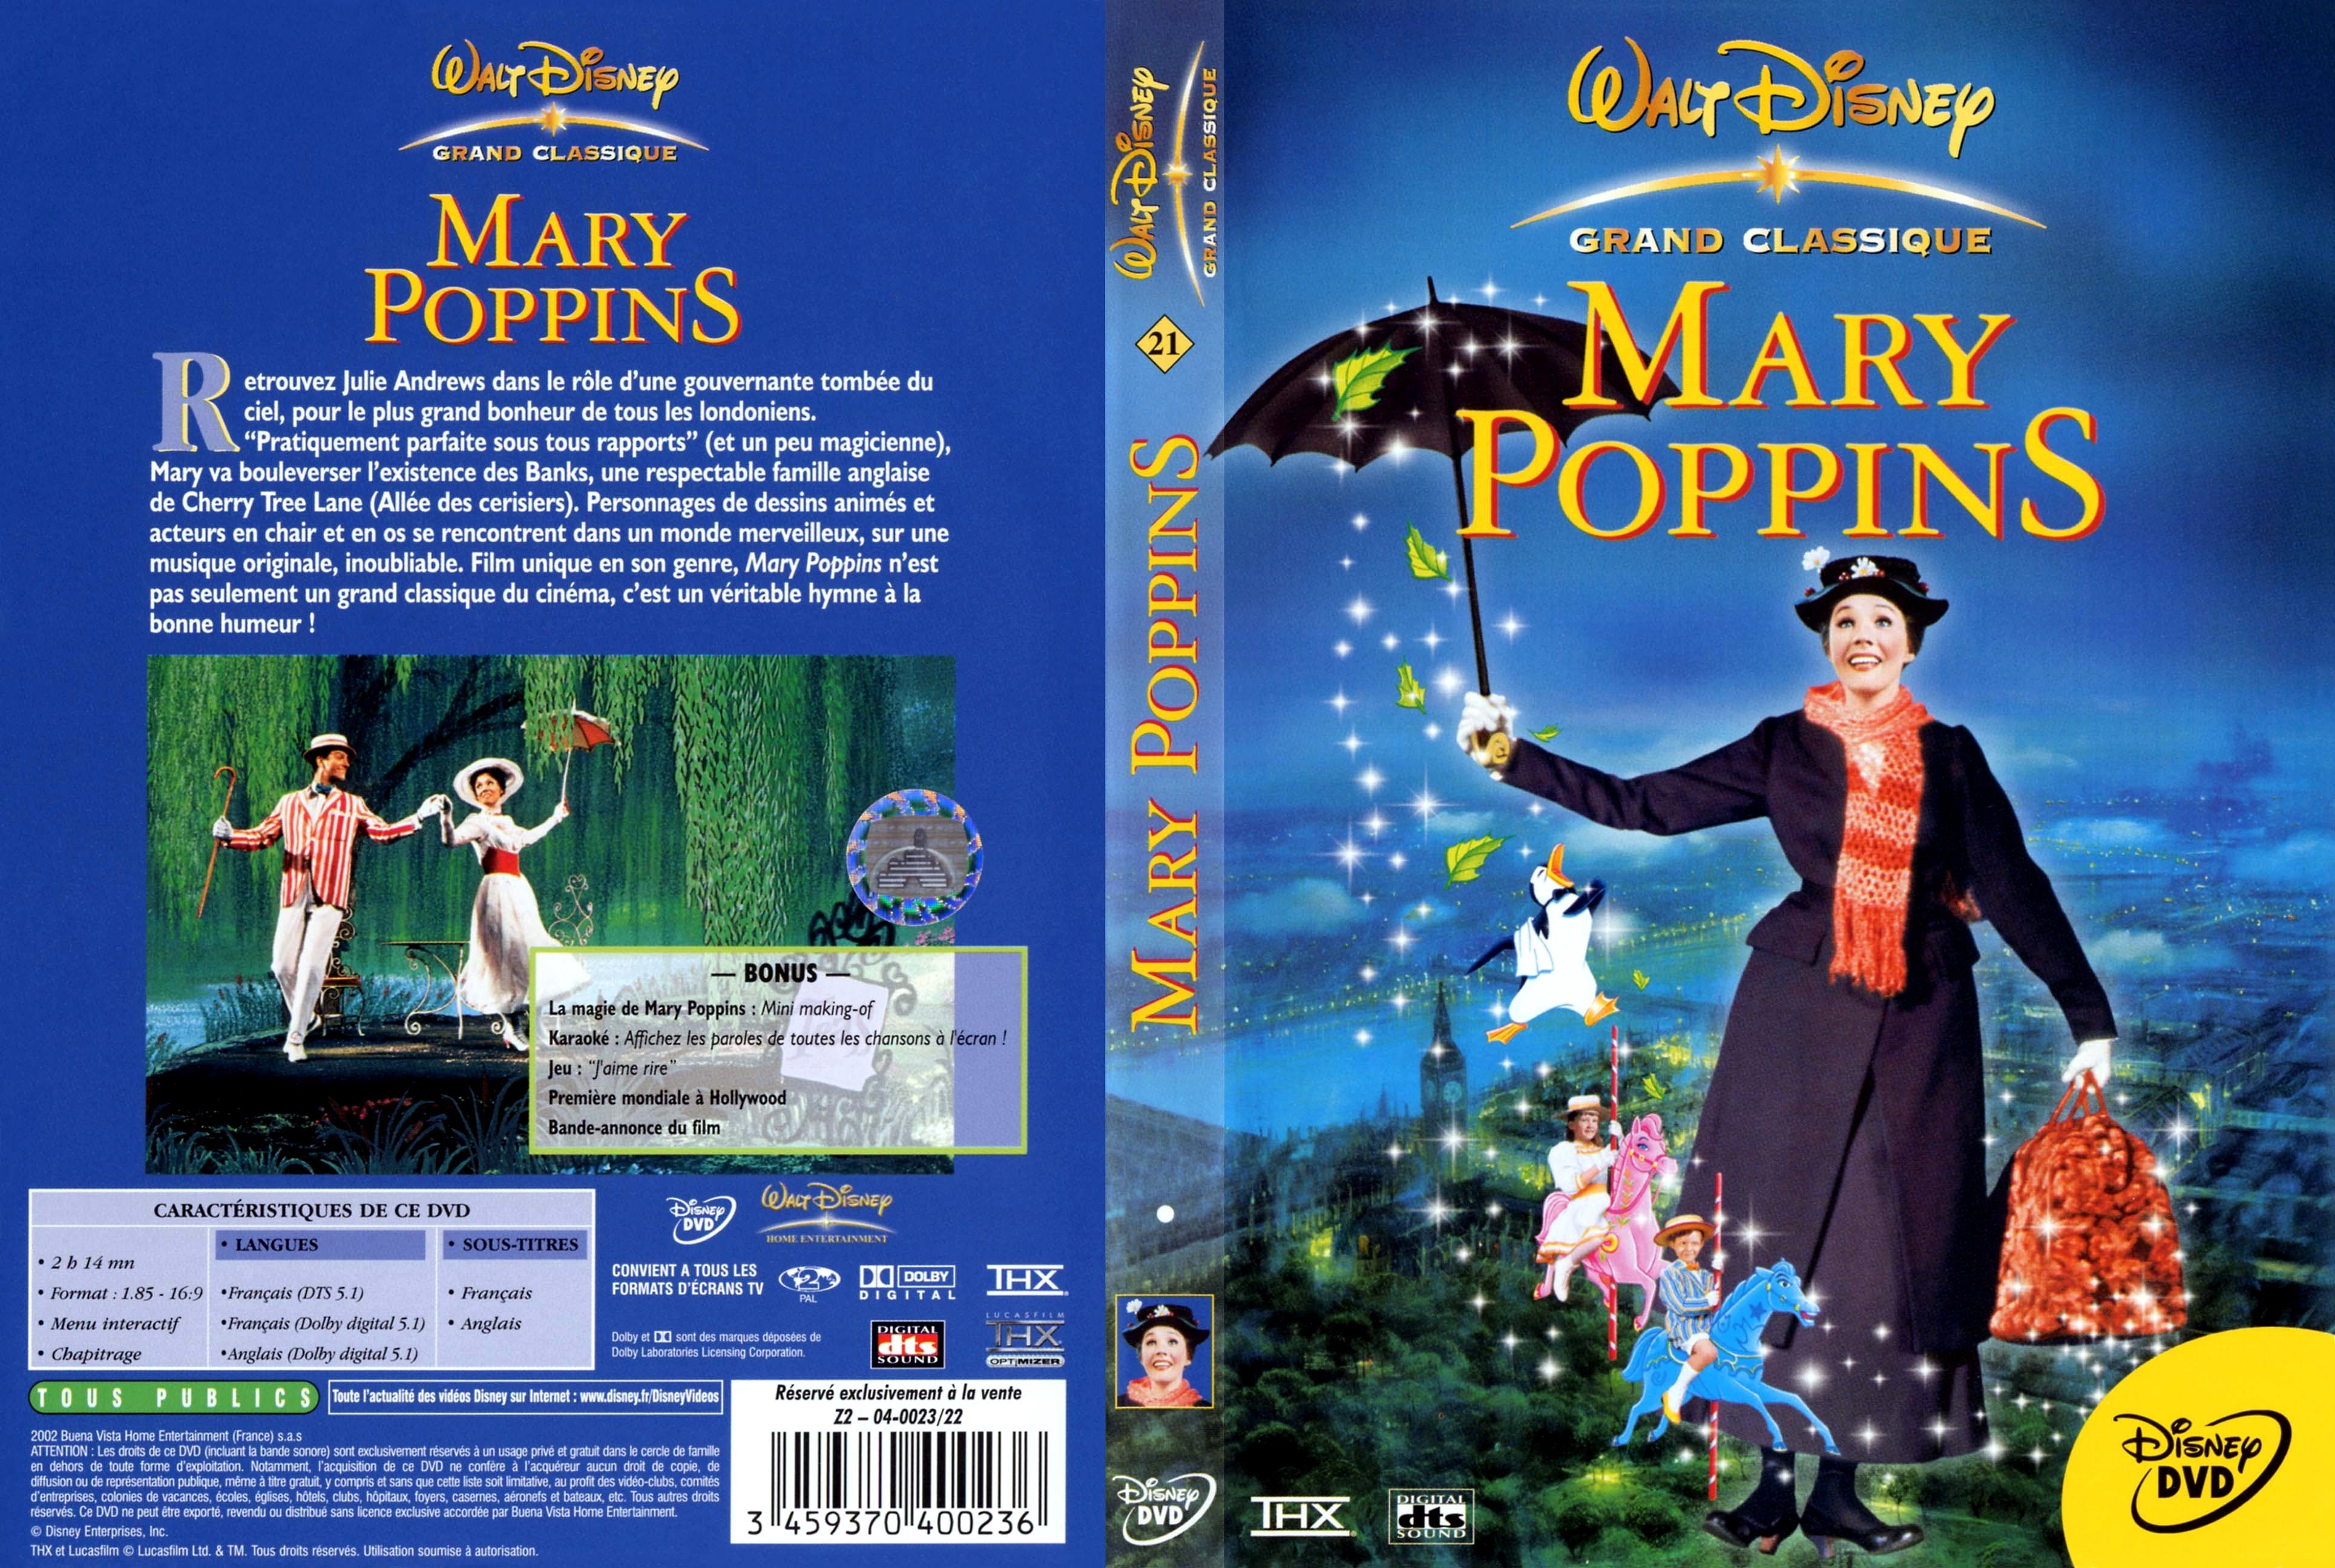 Jaquette DVD Mary Poppins